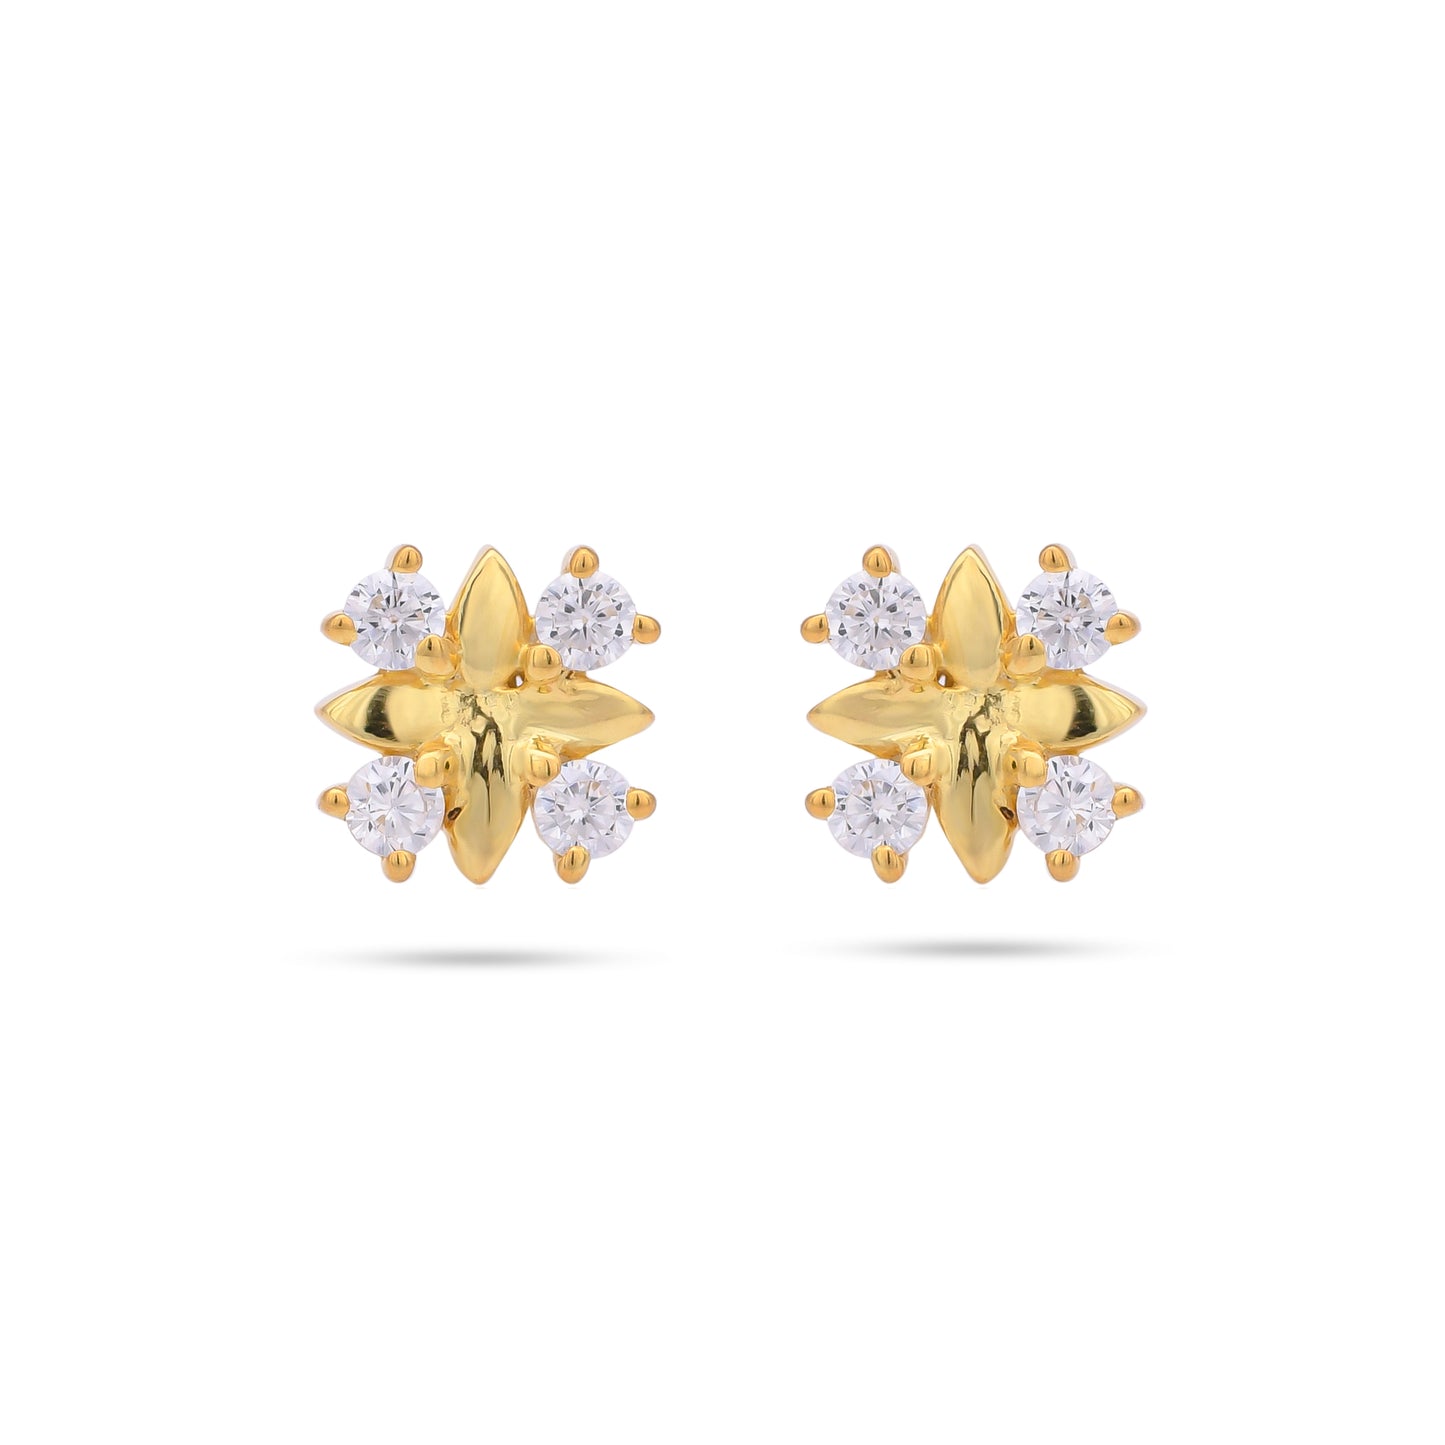 White Four Corner Earring Studs| 925 Silver| Gold Plated - From Purl Purl